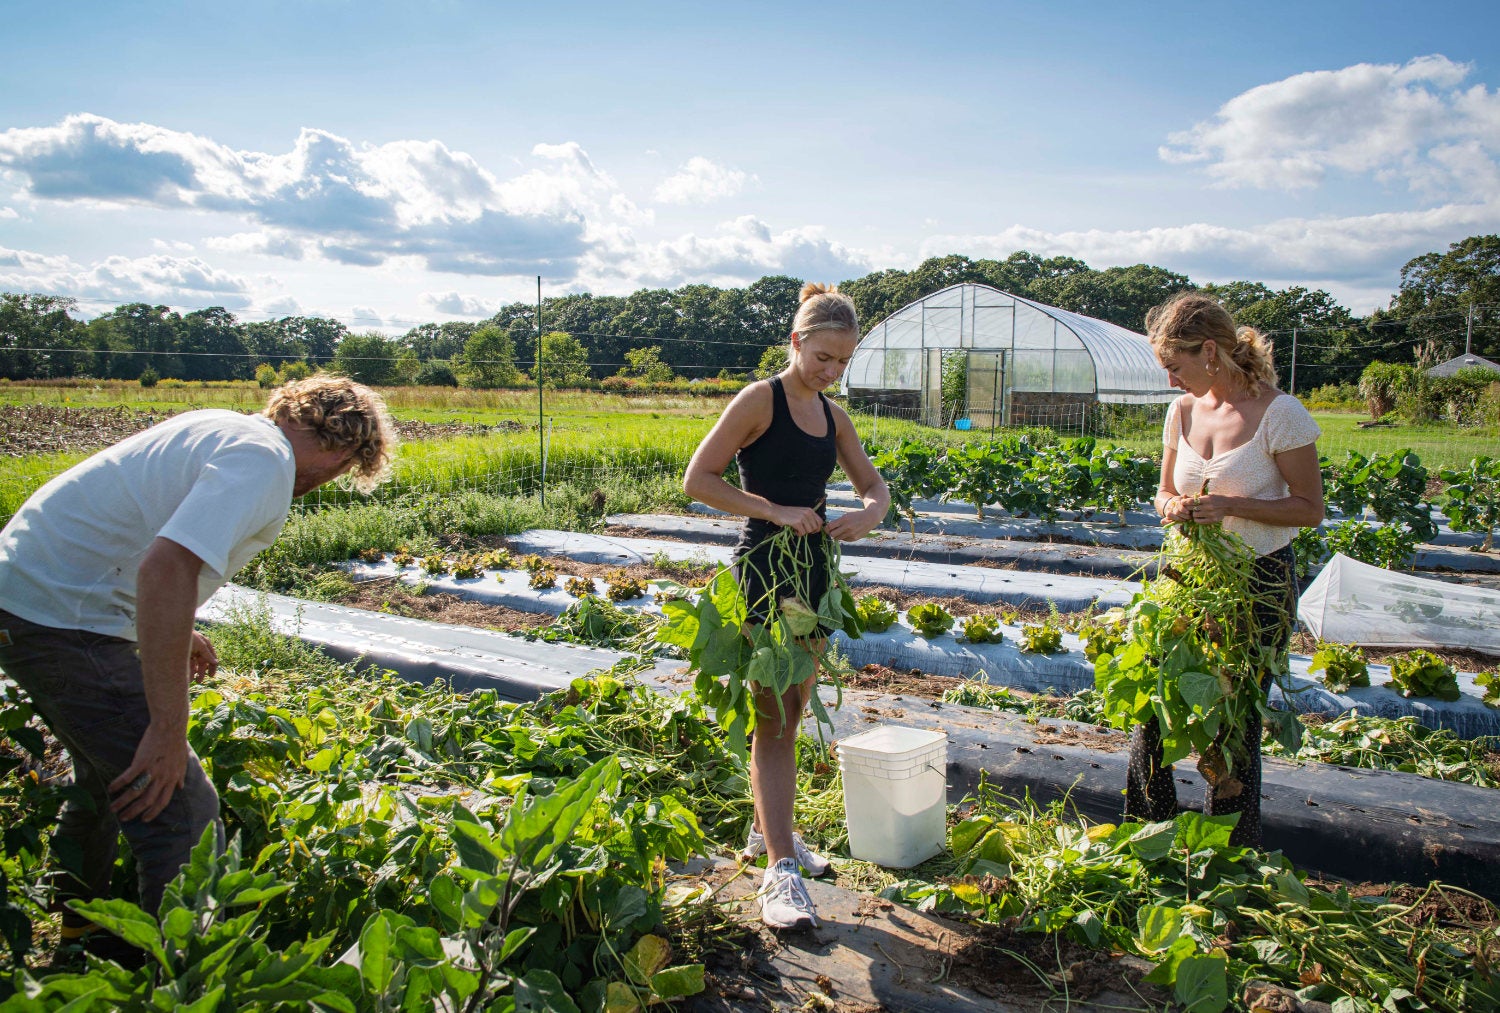 Students Harvesting at the URI Agronomy farm to illustrate the Agriculture and Food Systems Fellows Program